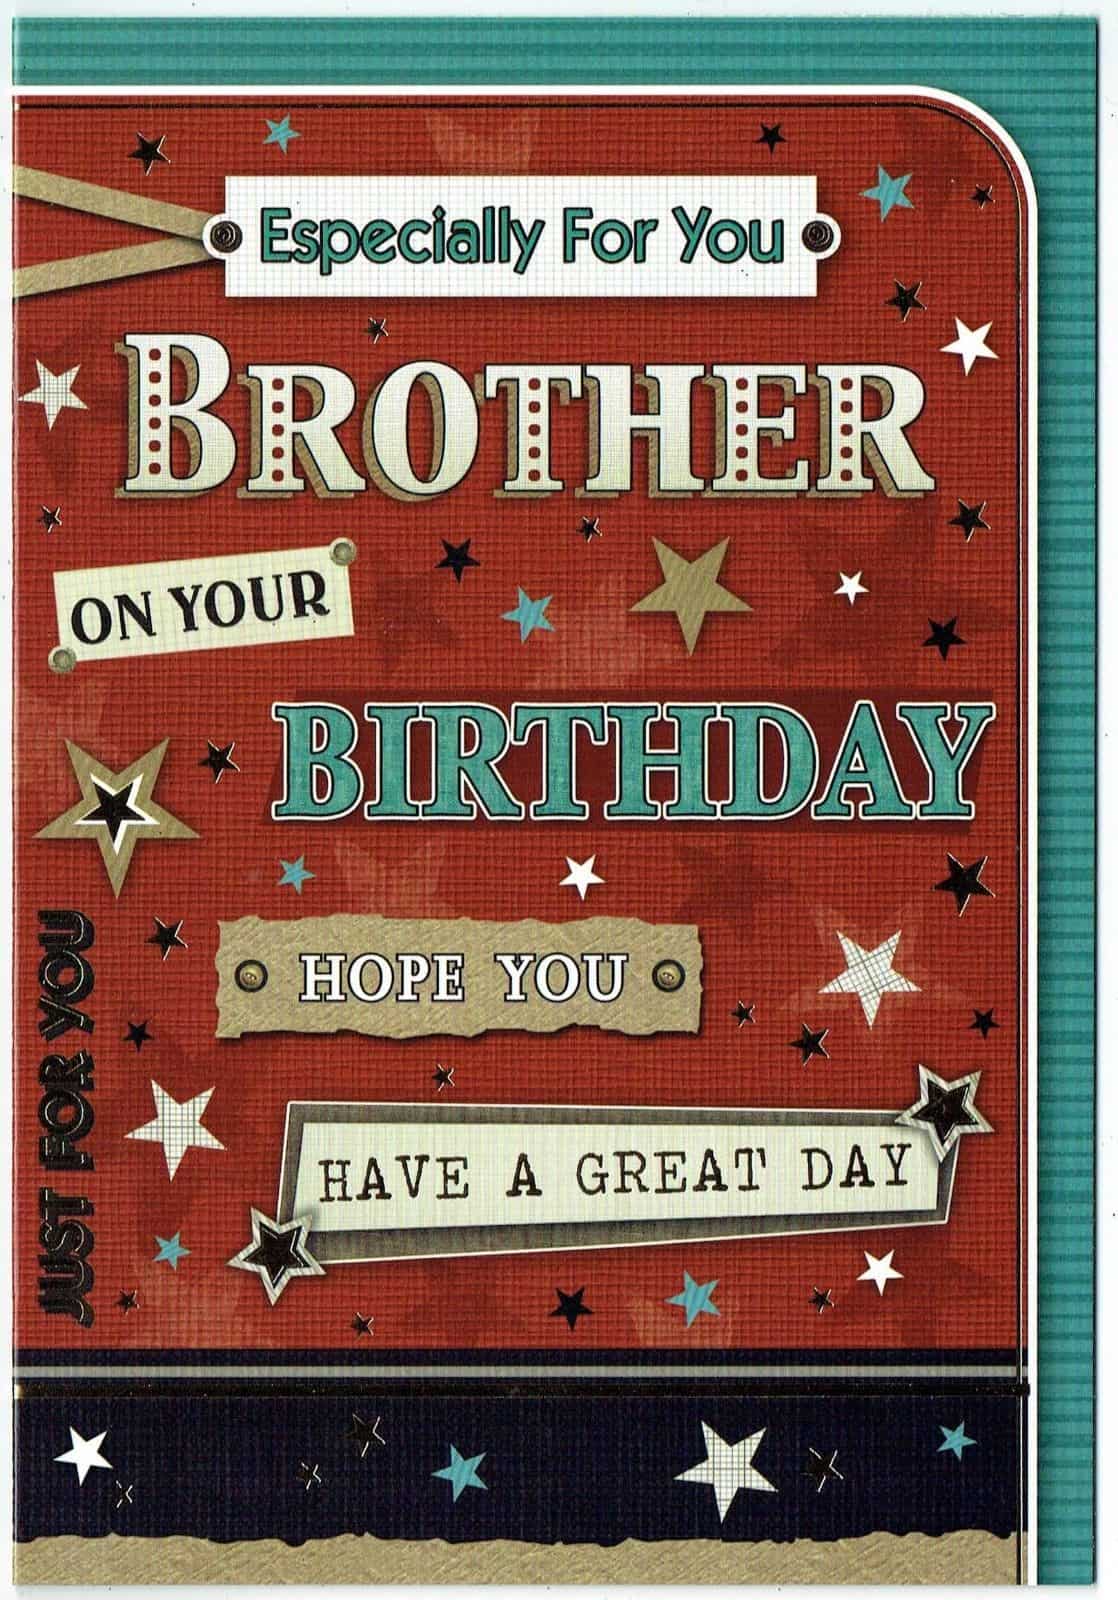 free-online-birthday-ecard-for-brother